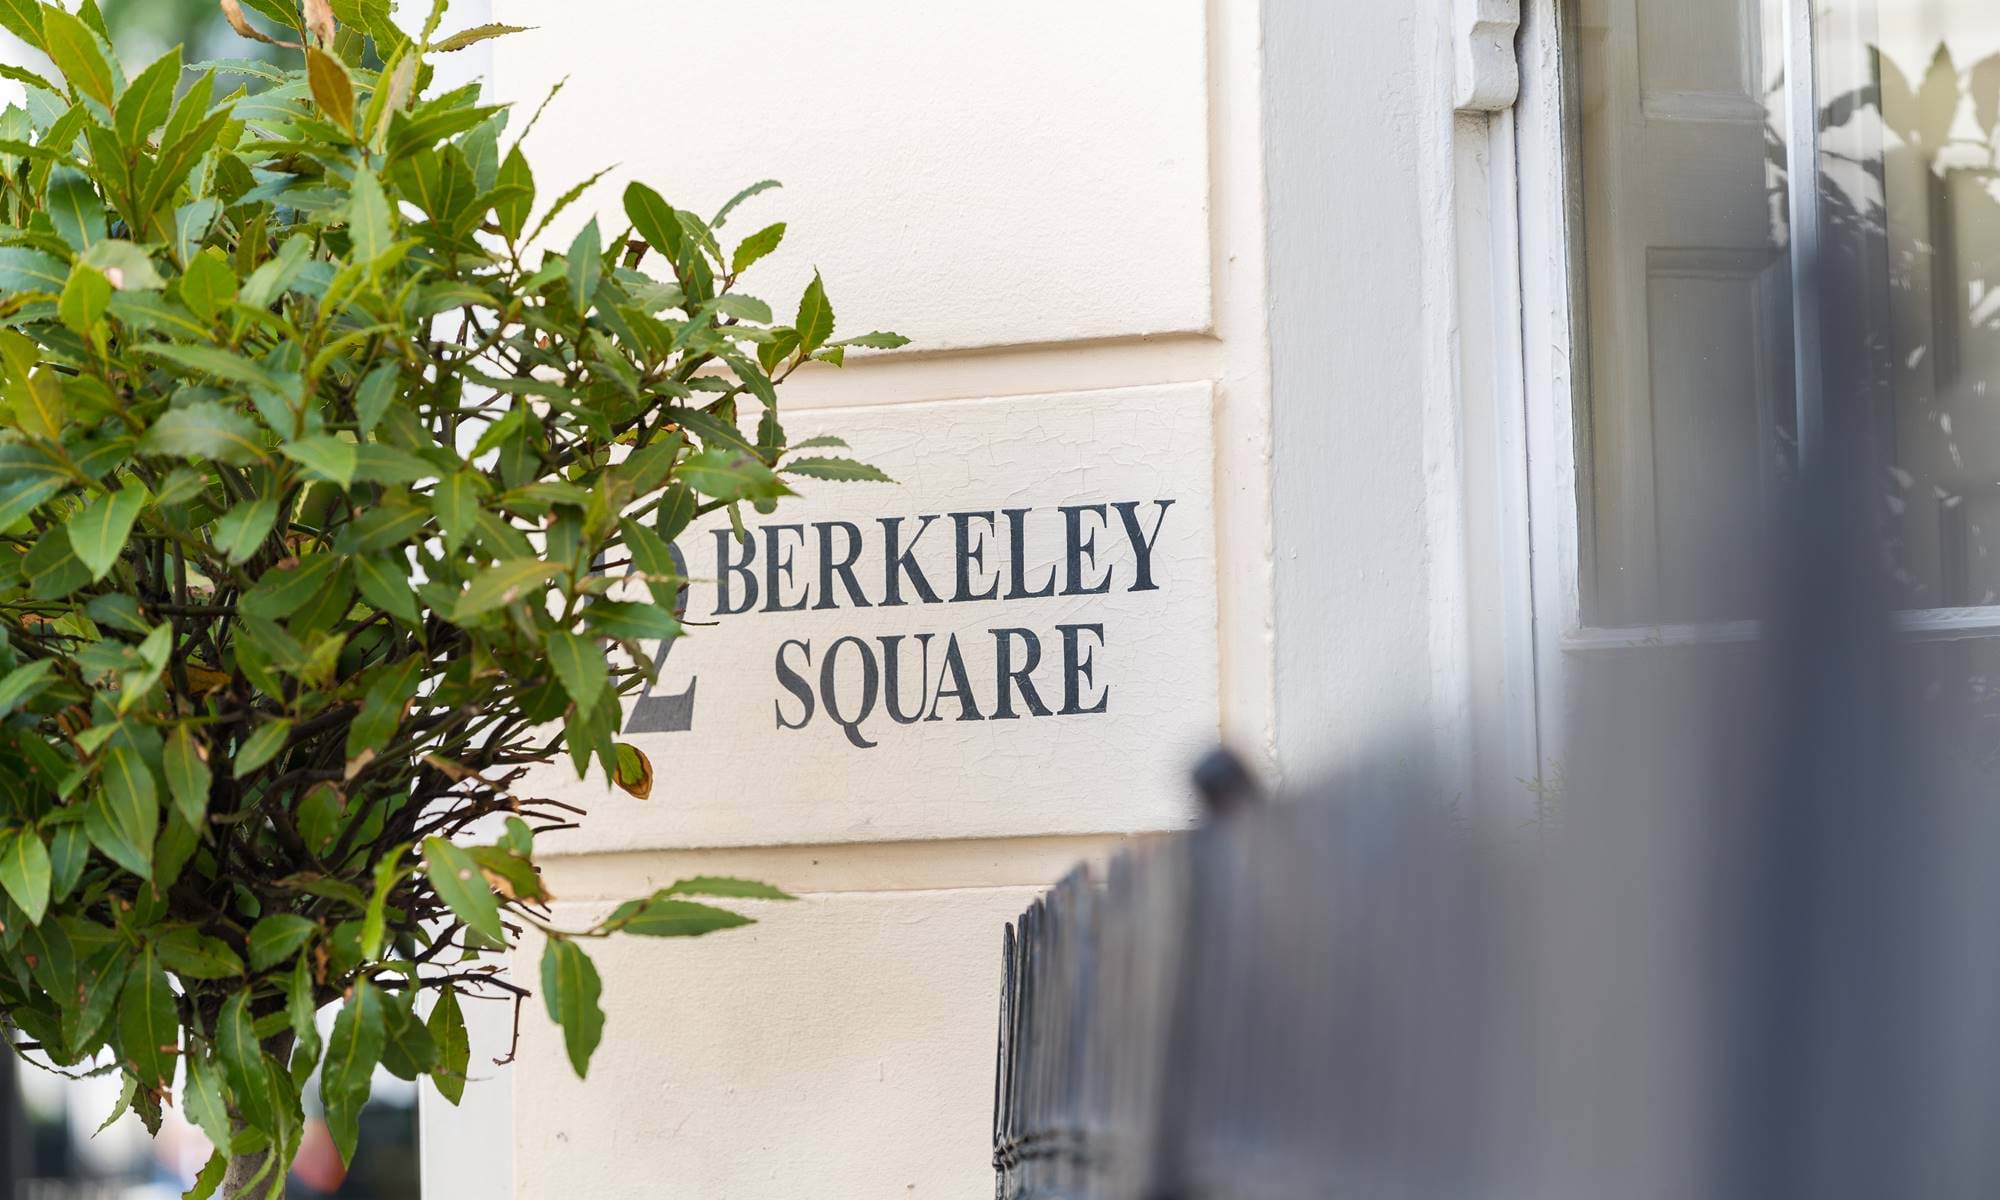 Day time view of Berkeley Square sign in London